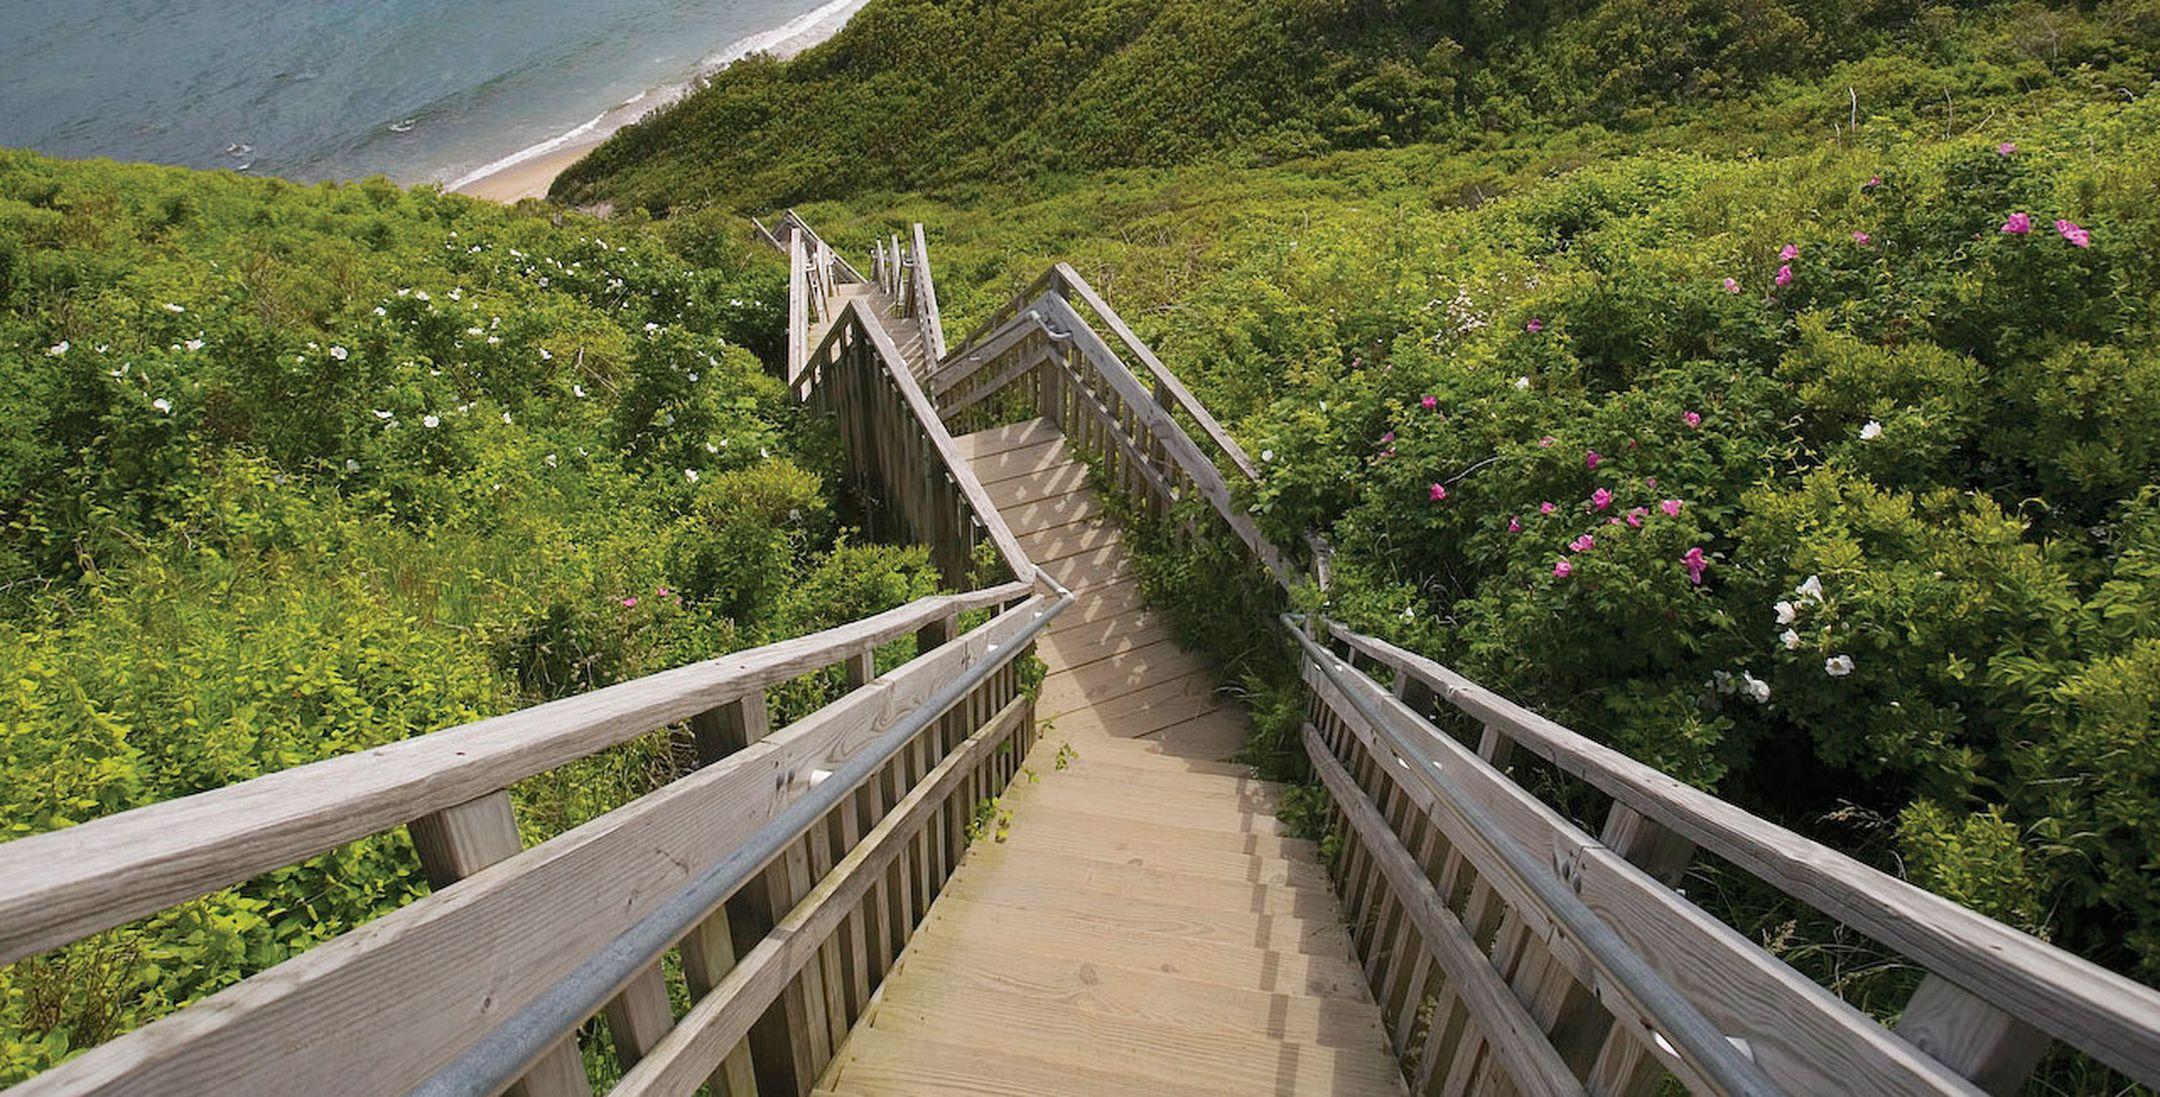 View from several hundred feet up looking down a boardwalk staircase running through greenery to the surfside below.